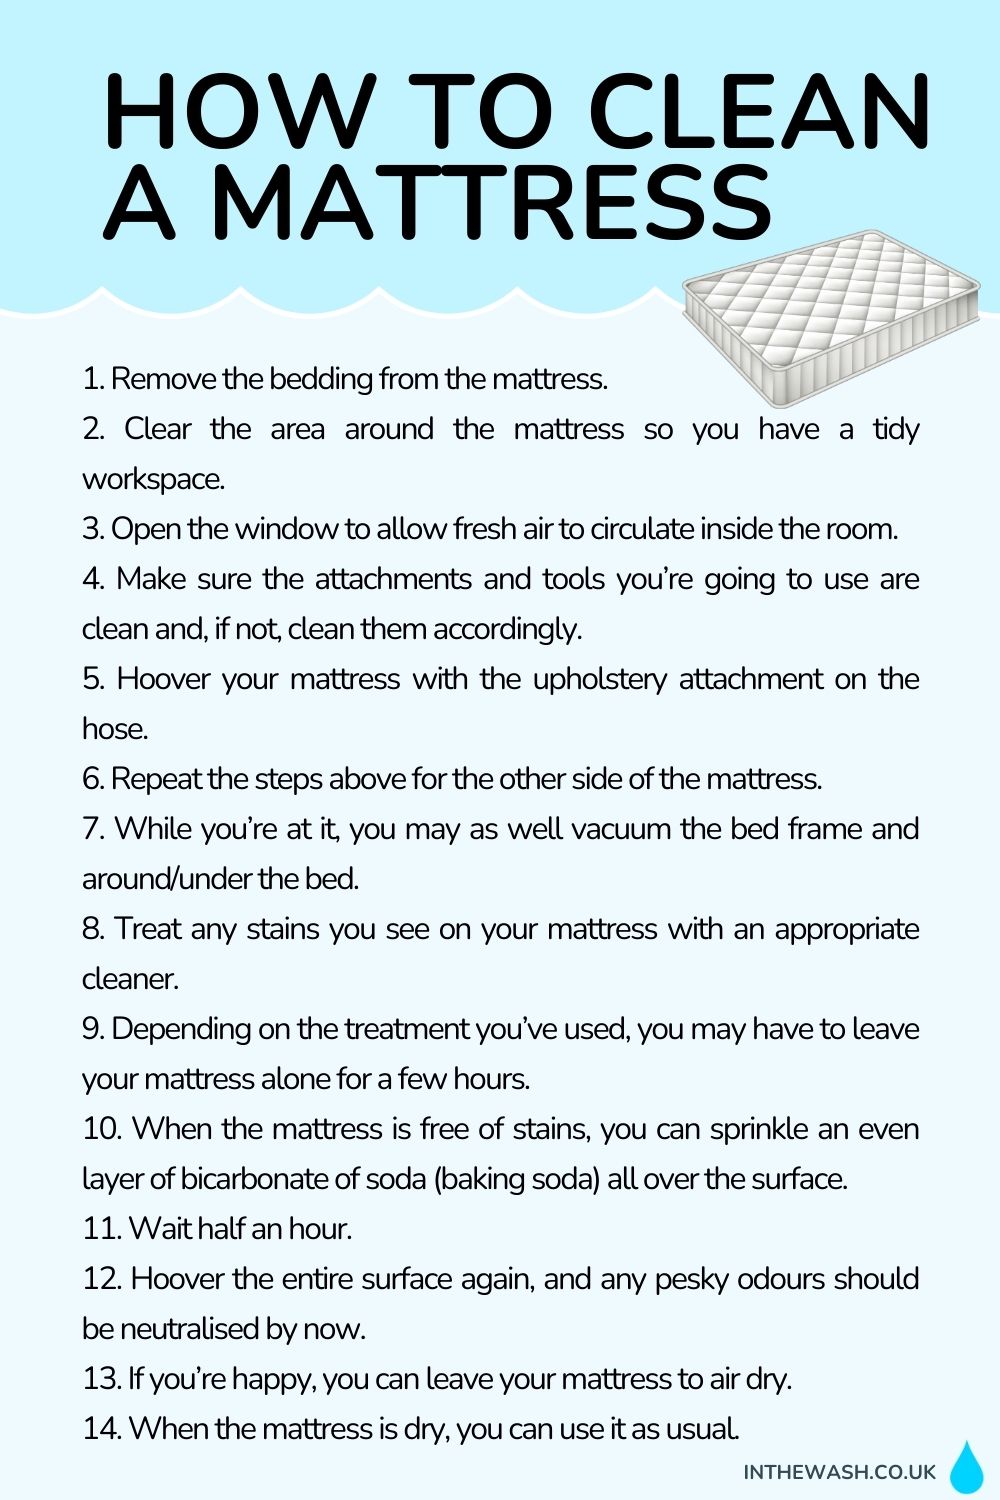 How to clean a mattress step by step